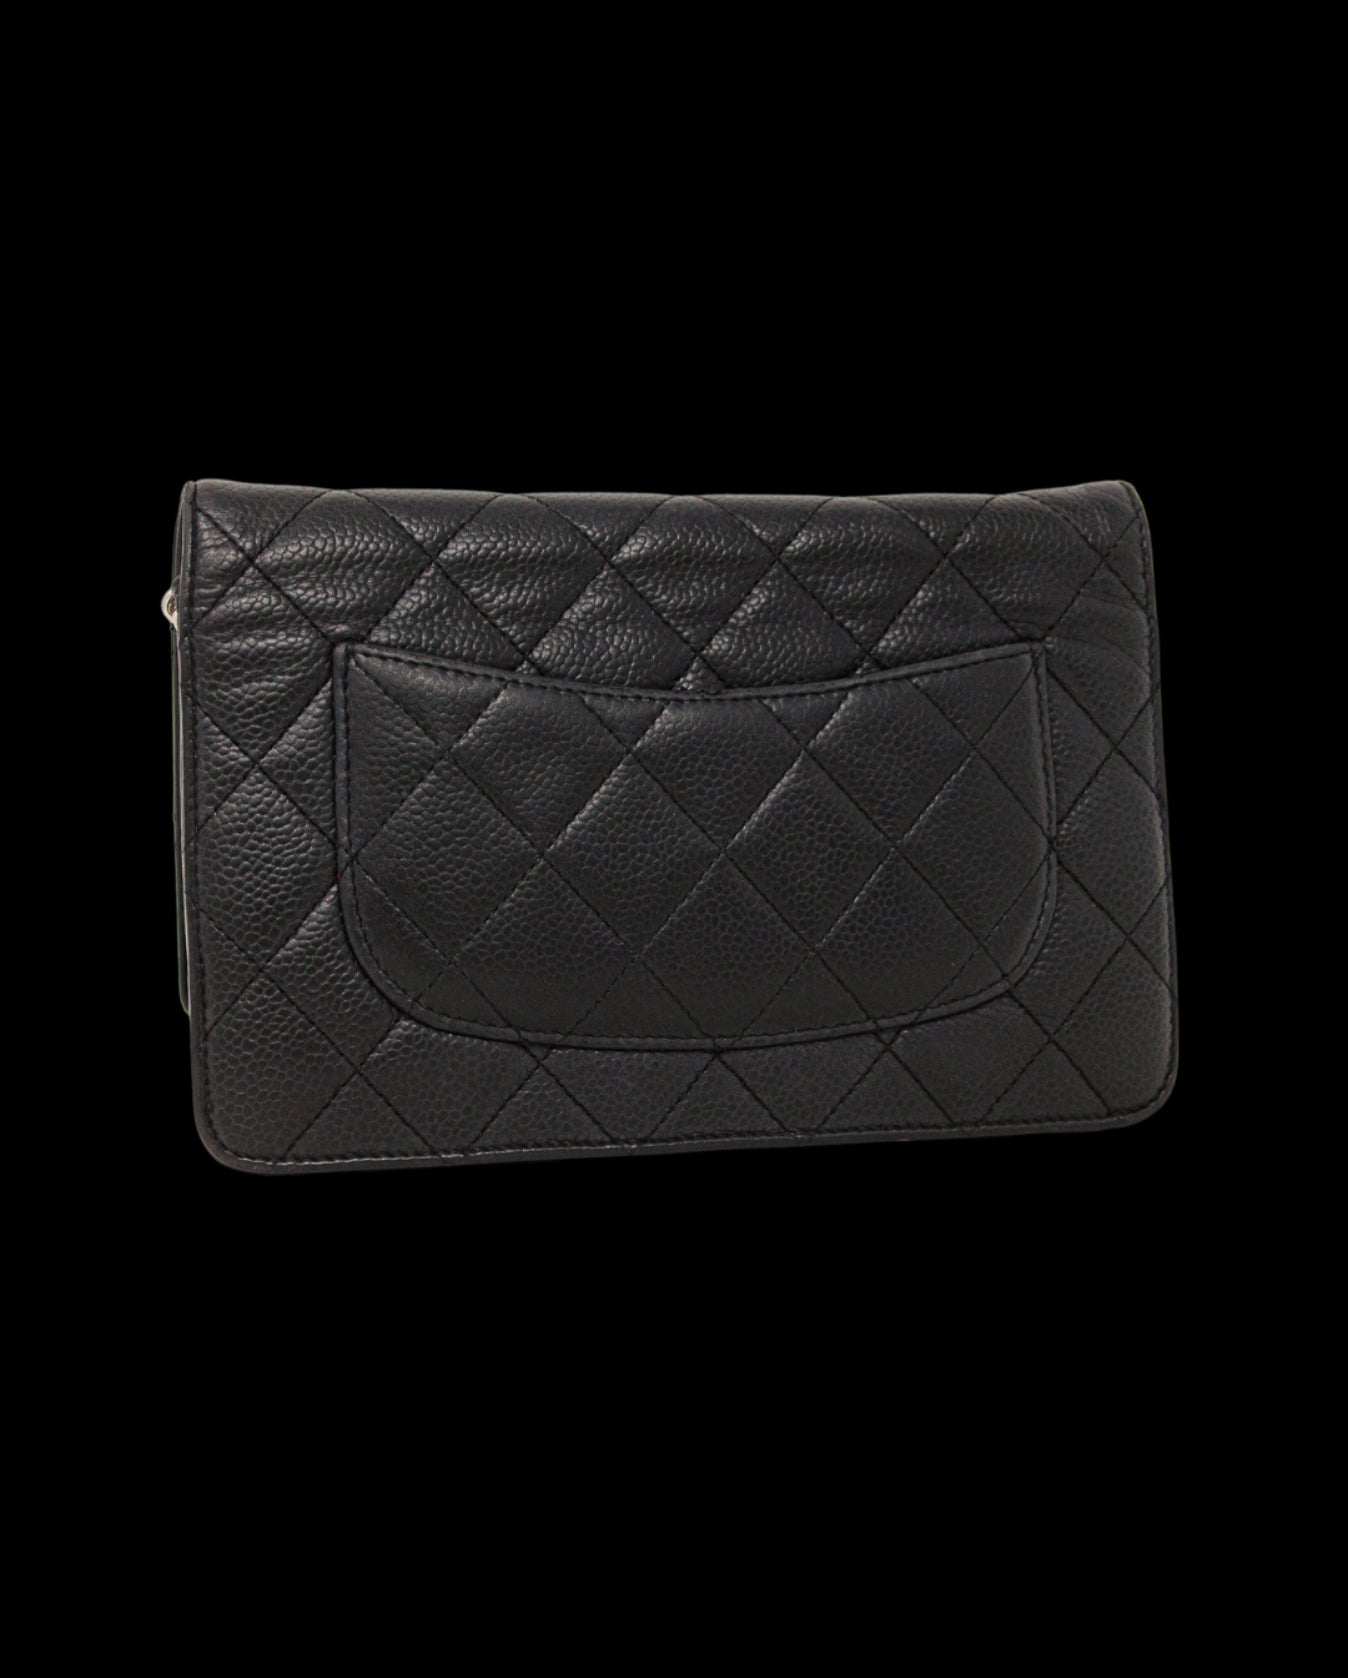 wallet caviar leather